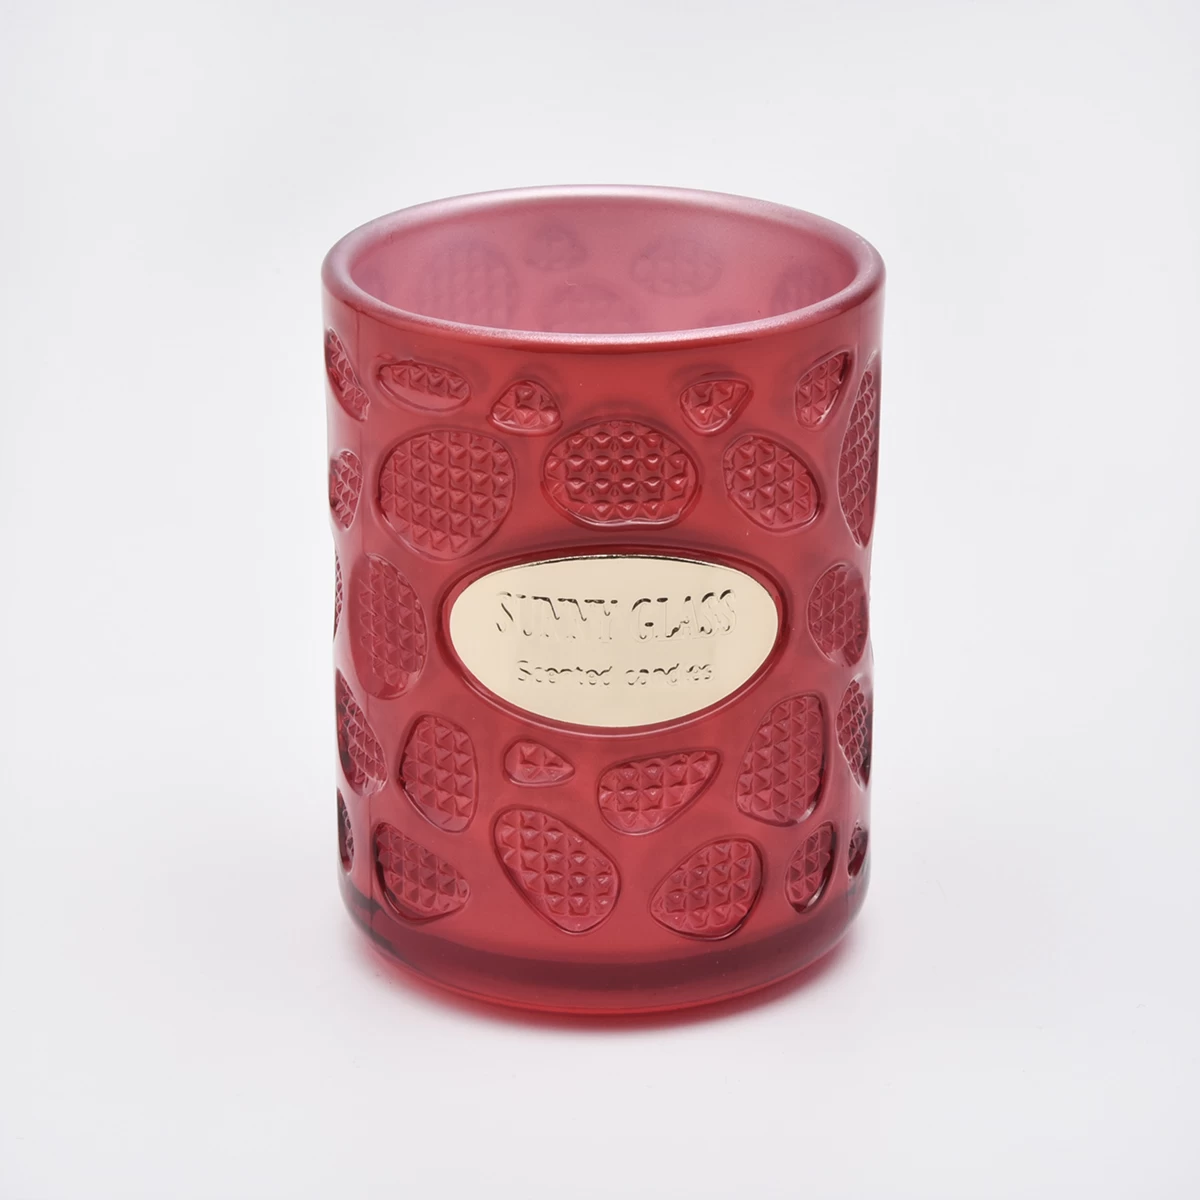 Sunny Glasswre unique candle jars for luxury brand